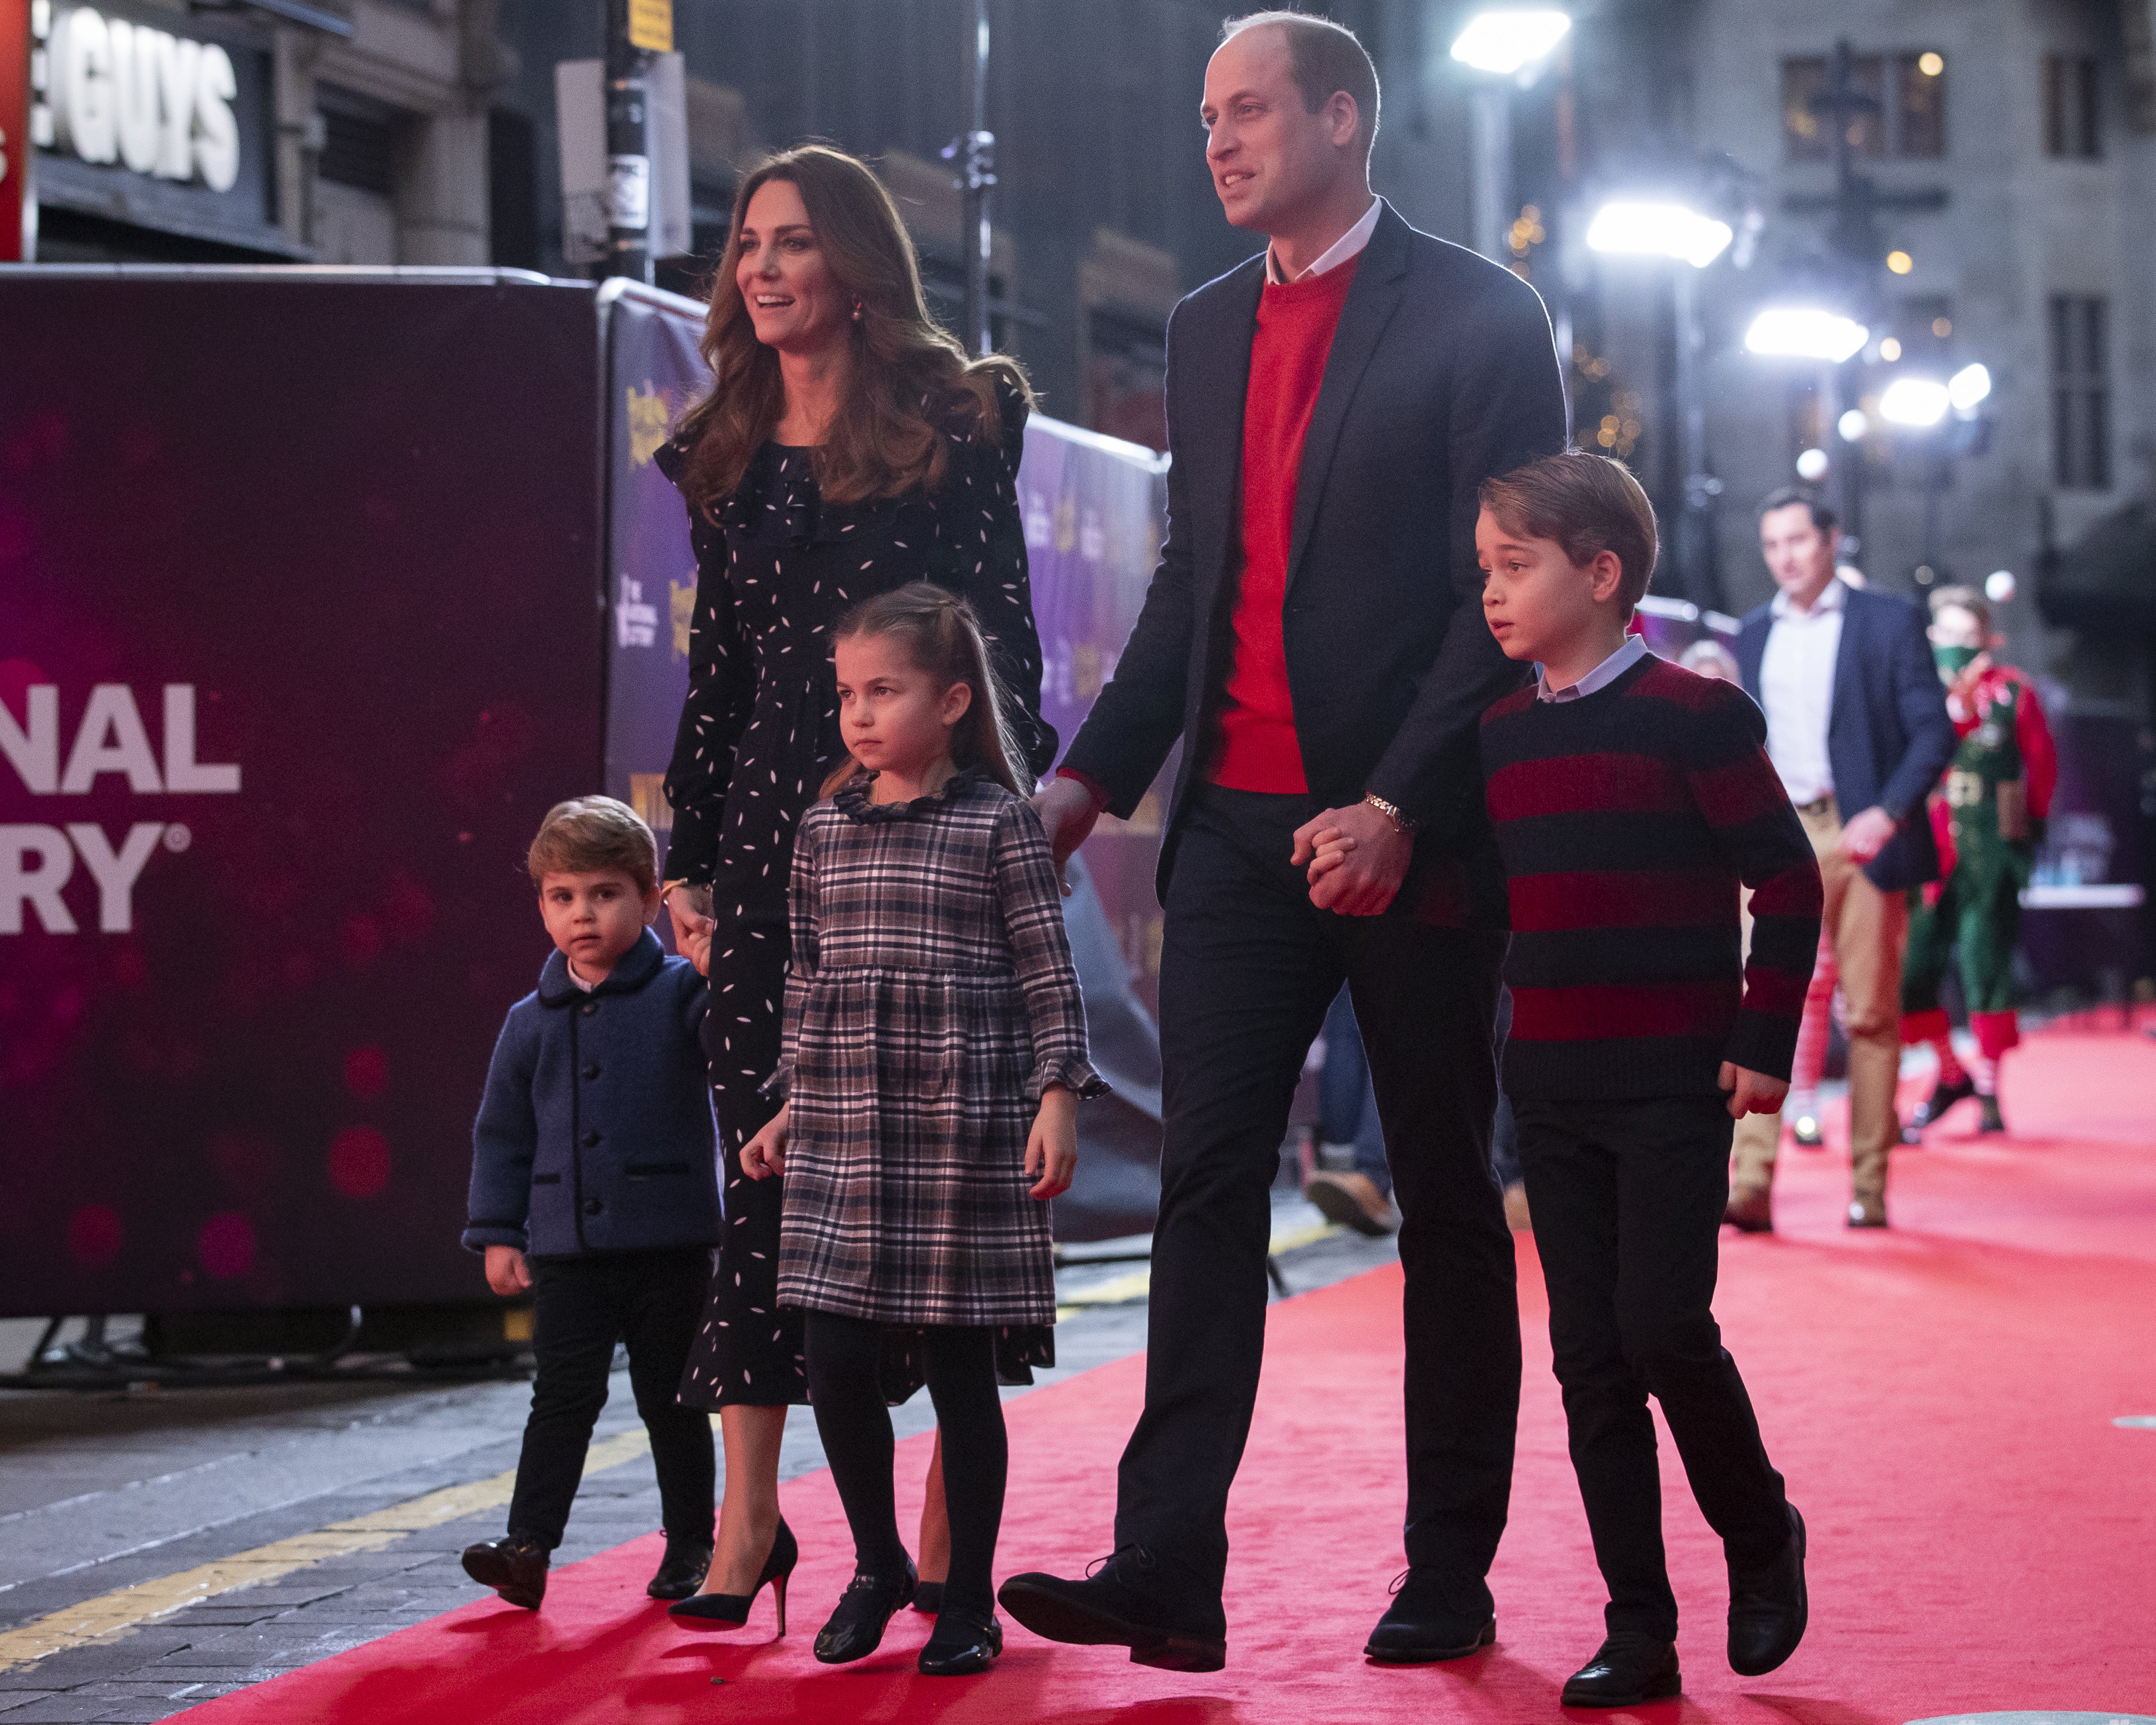 Prince William, Duke of Cambridge and Catherine, Duchess of Cambridge with their children, Prince Louis, Princess Charlotte and Prince George, attend a special pantomime performance at London's Palladium Theatre, hosted by The National Lottery, to thank key workers and their families for their efforts throughout the pandemic on December 11, 2020 in London, England.  | Source: Getty Images